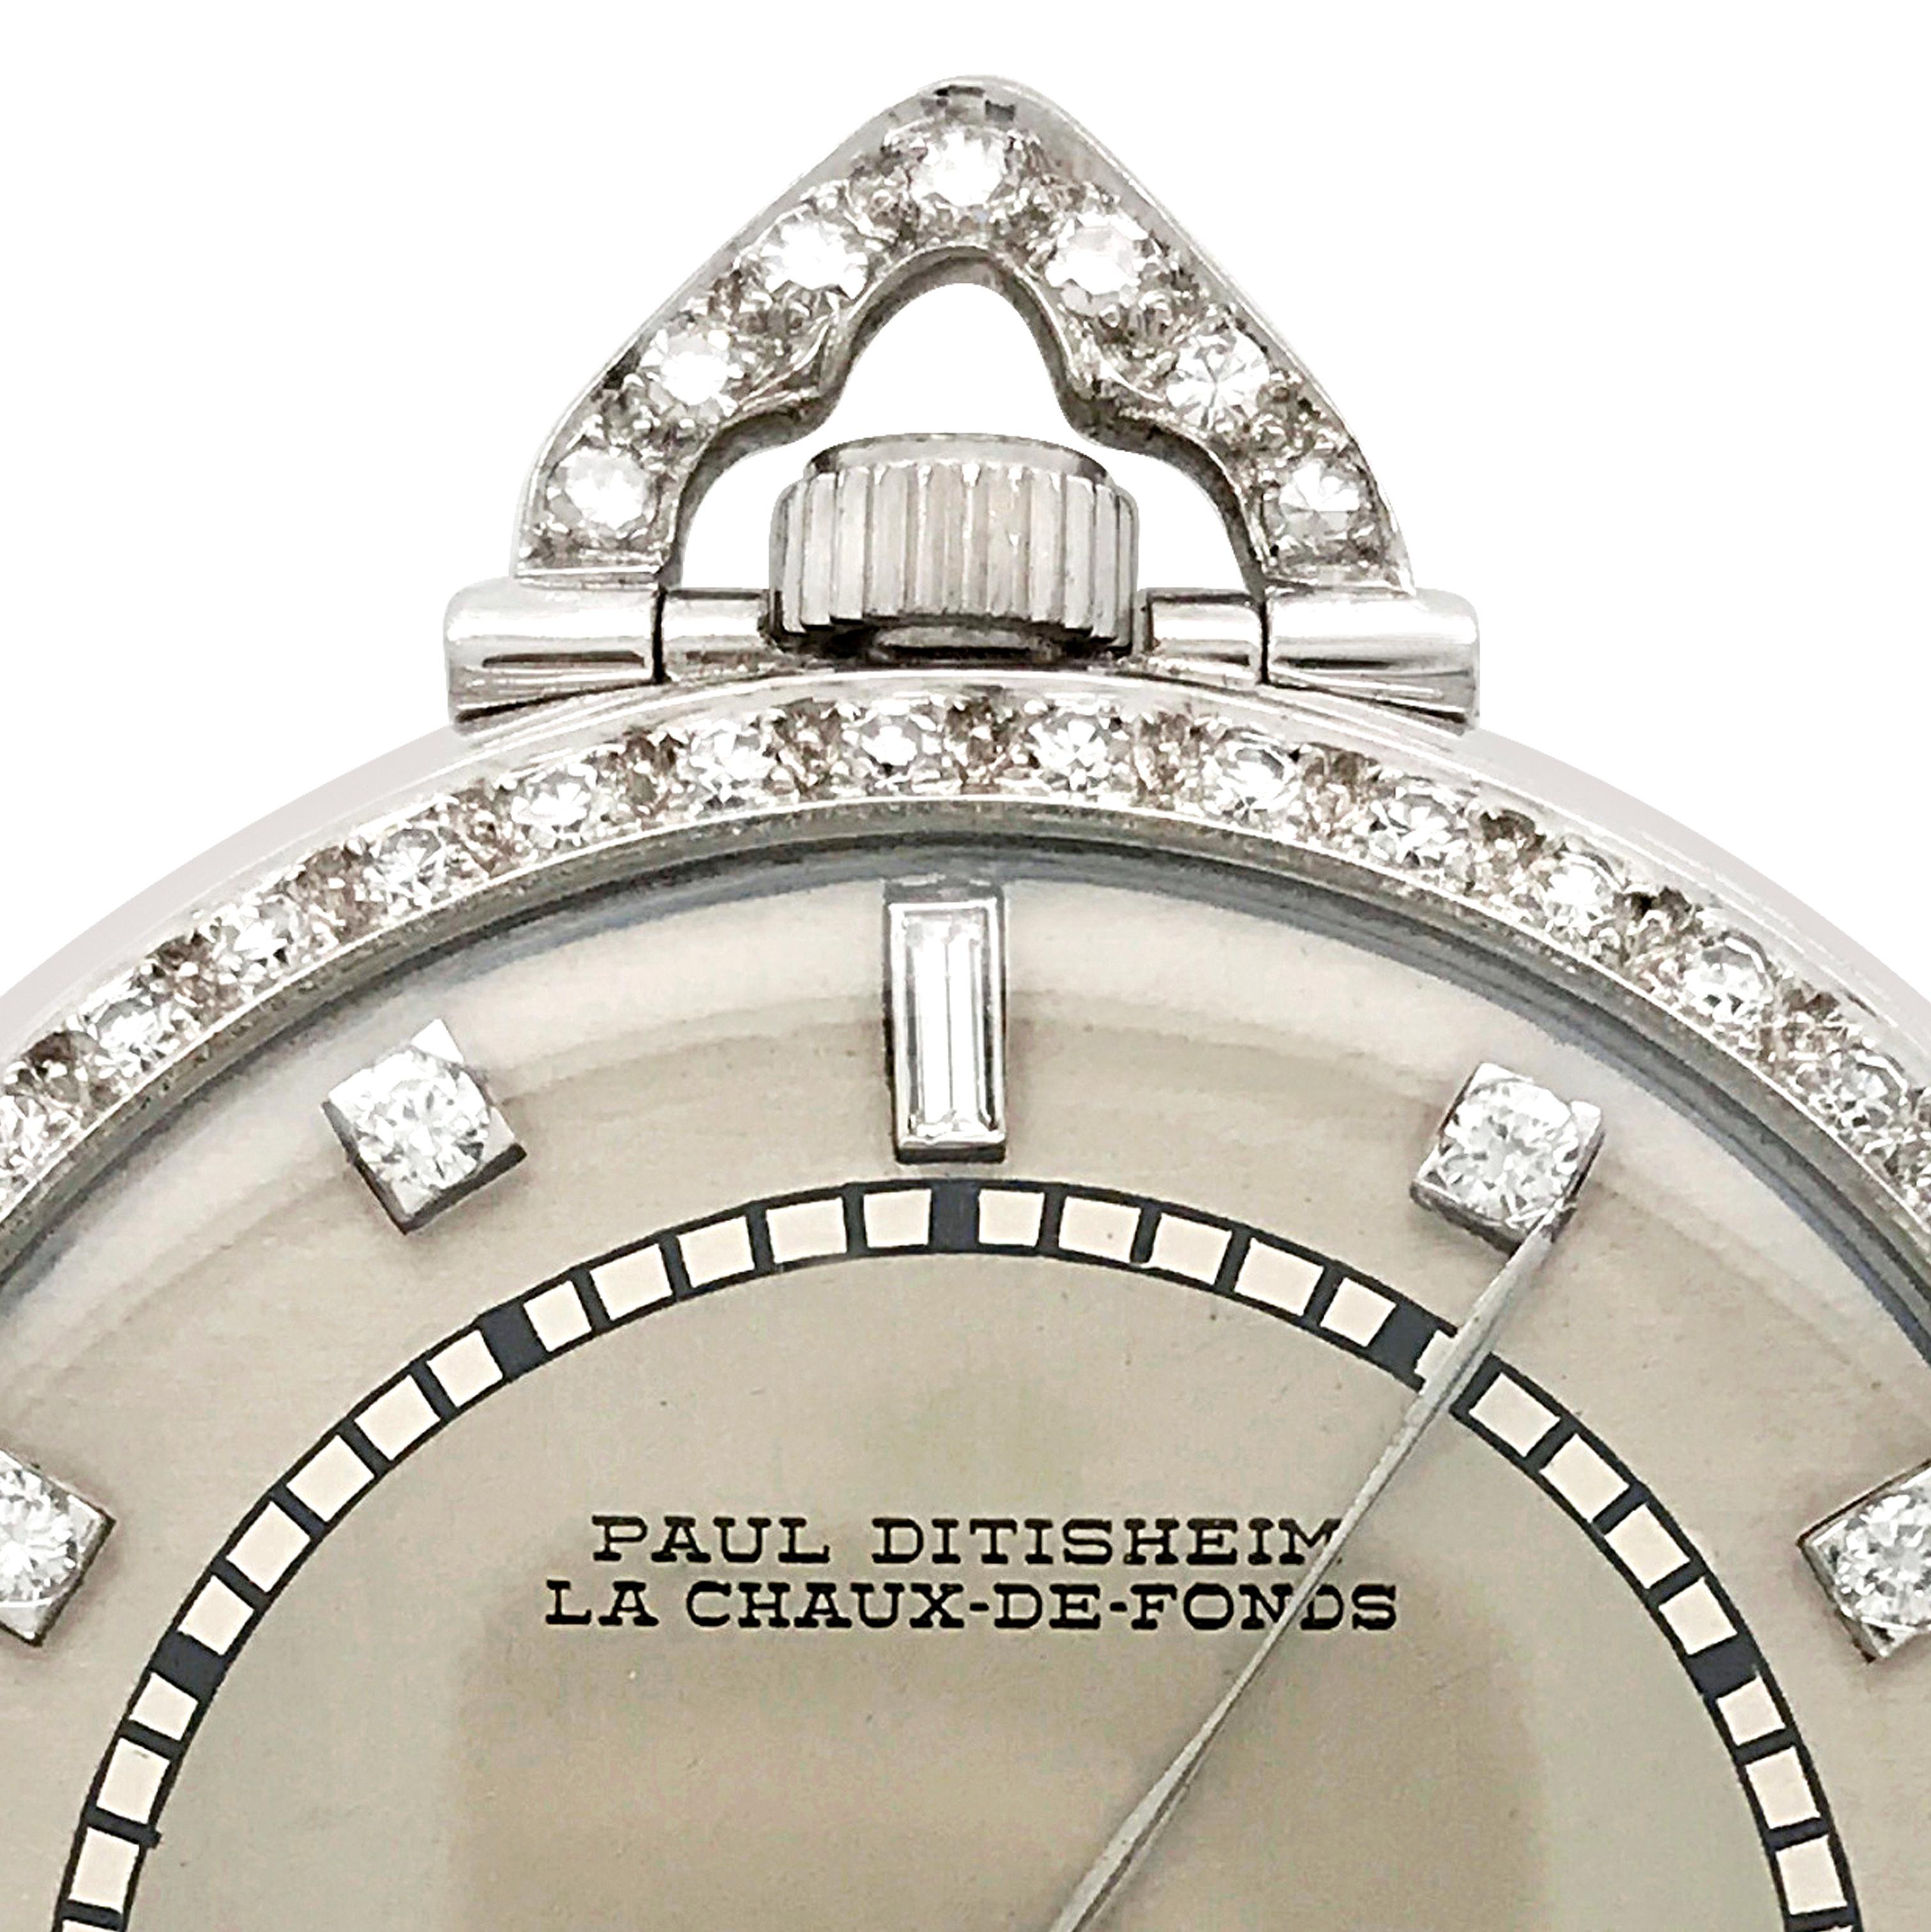 This vintage diamond open face pocket watch is rendered in platinum, weighs 62.11 grams and measures 44mm in diameter. Set within a diamond-set bezel and bow, the circular brushed and matte silver-tone dial applies round and baguette diamond